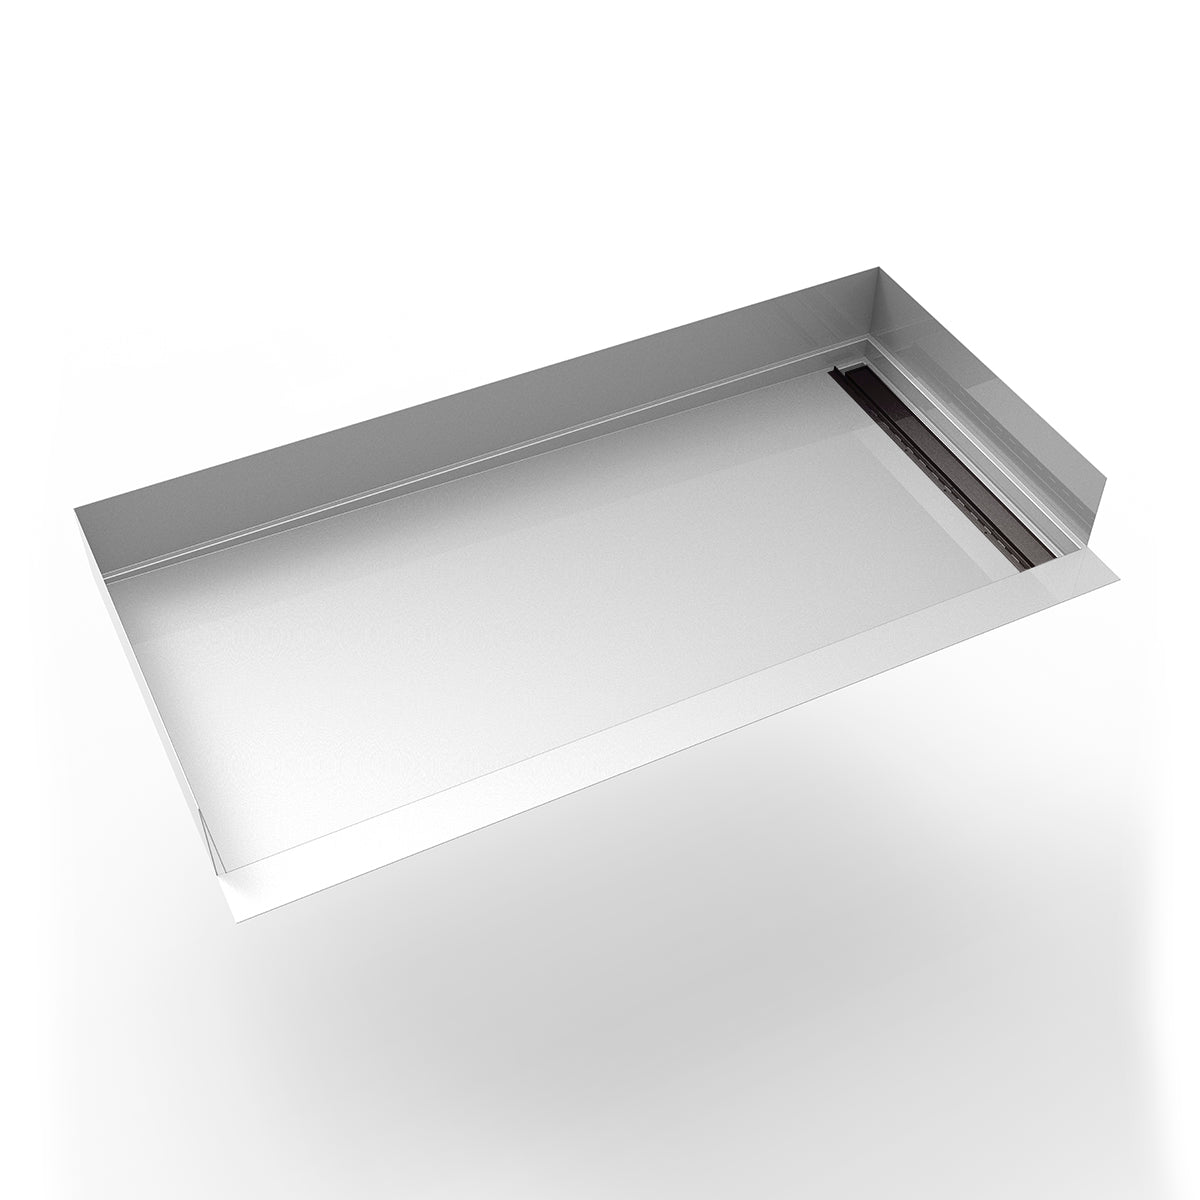 Infinity Drain 30"x 60" Curbless Stainless Steel Shower Base with Right Wall Tile Insert Linear Drain location